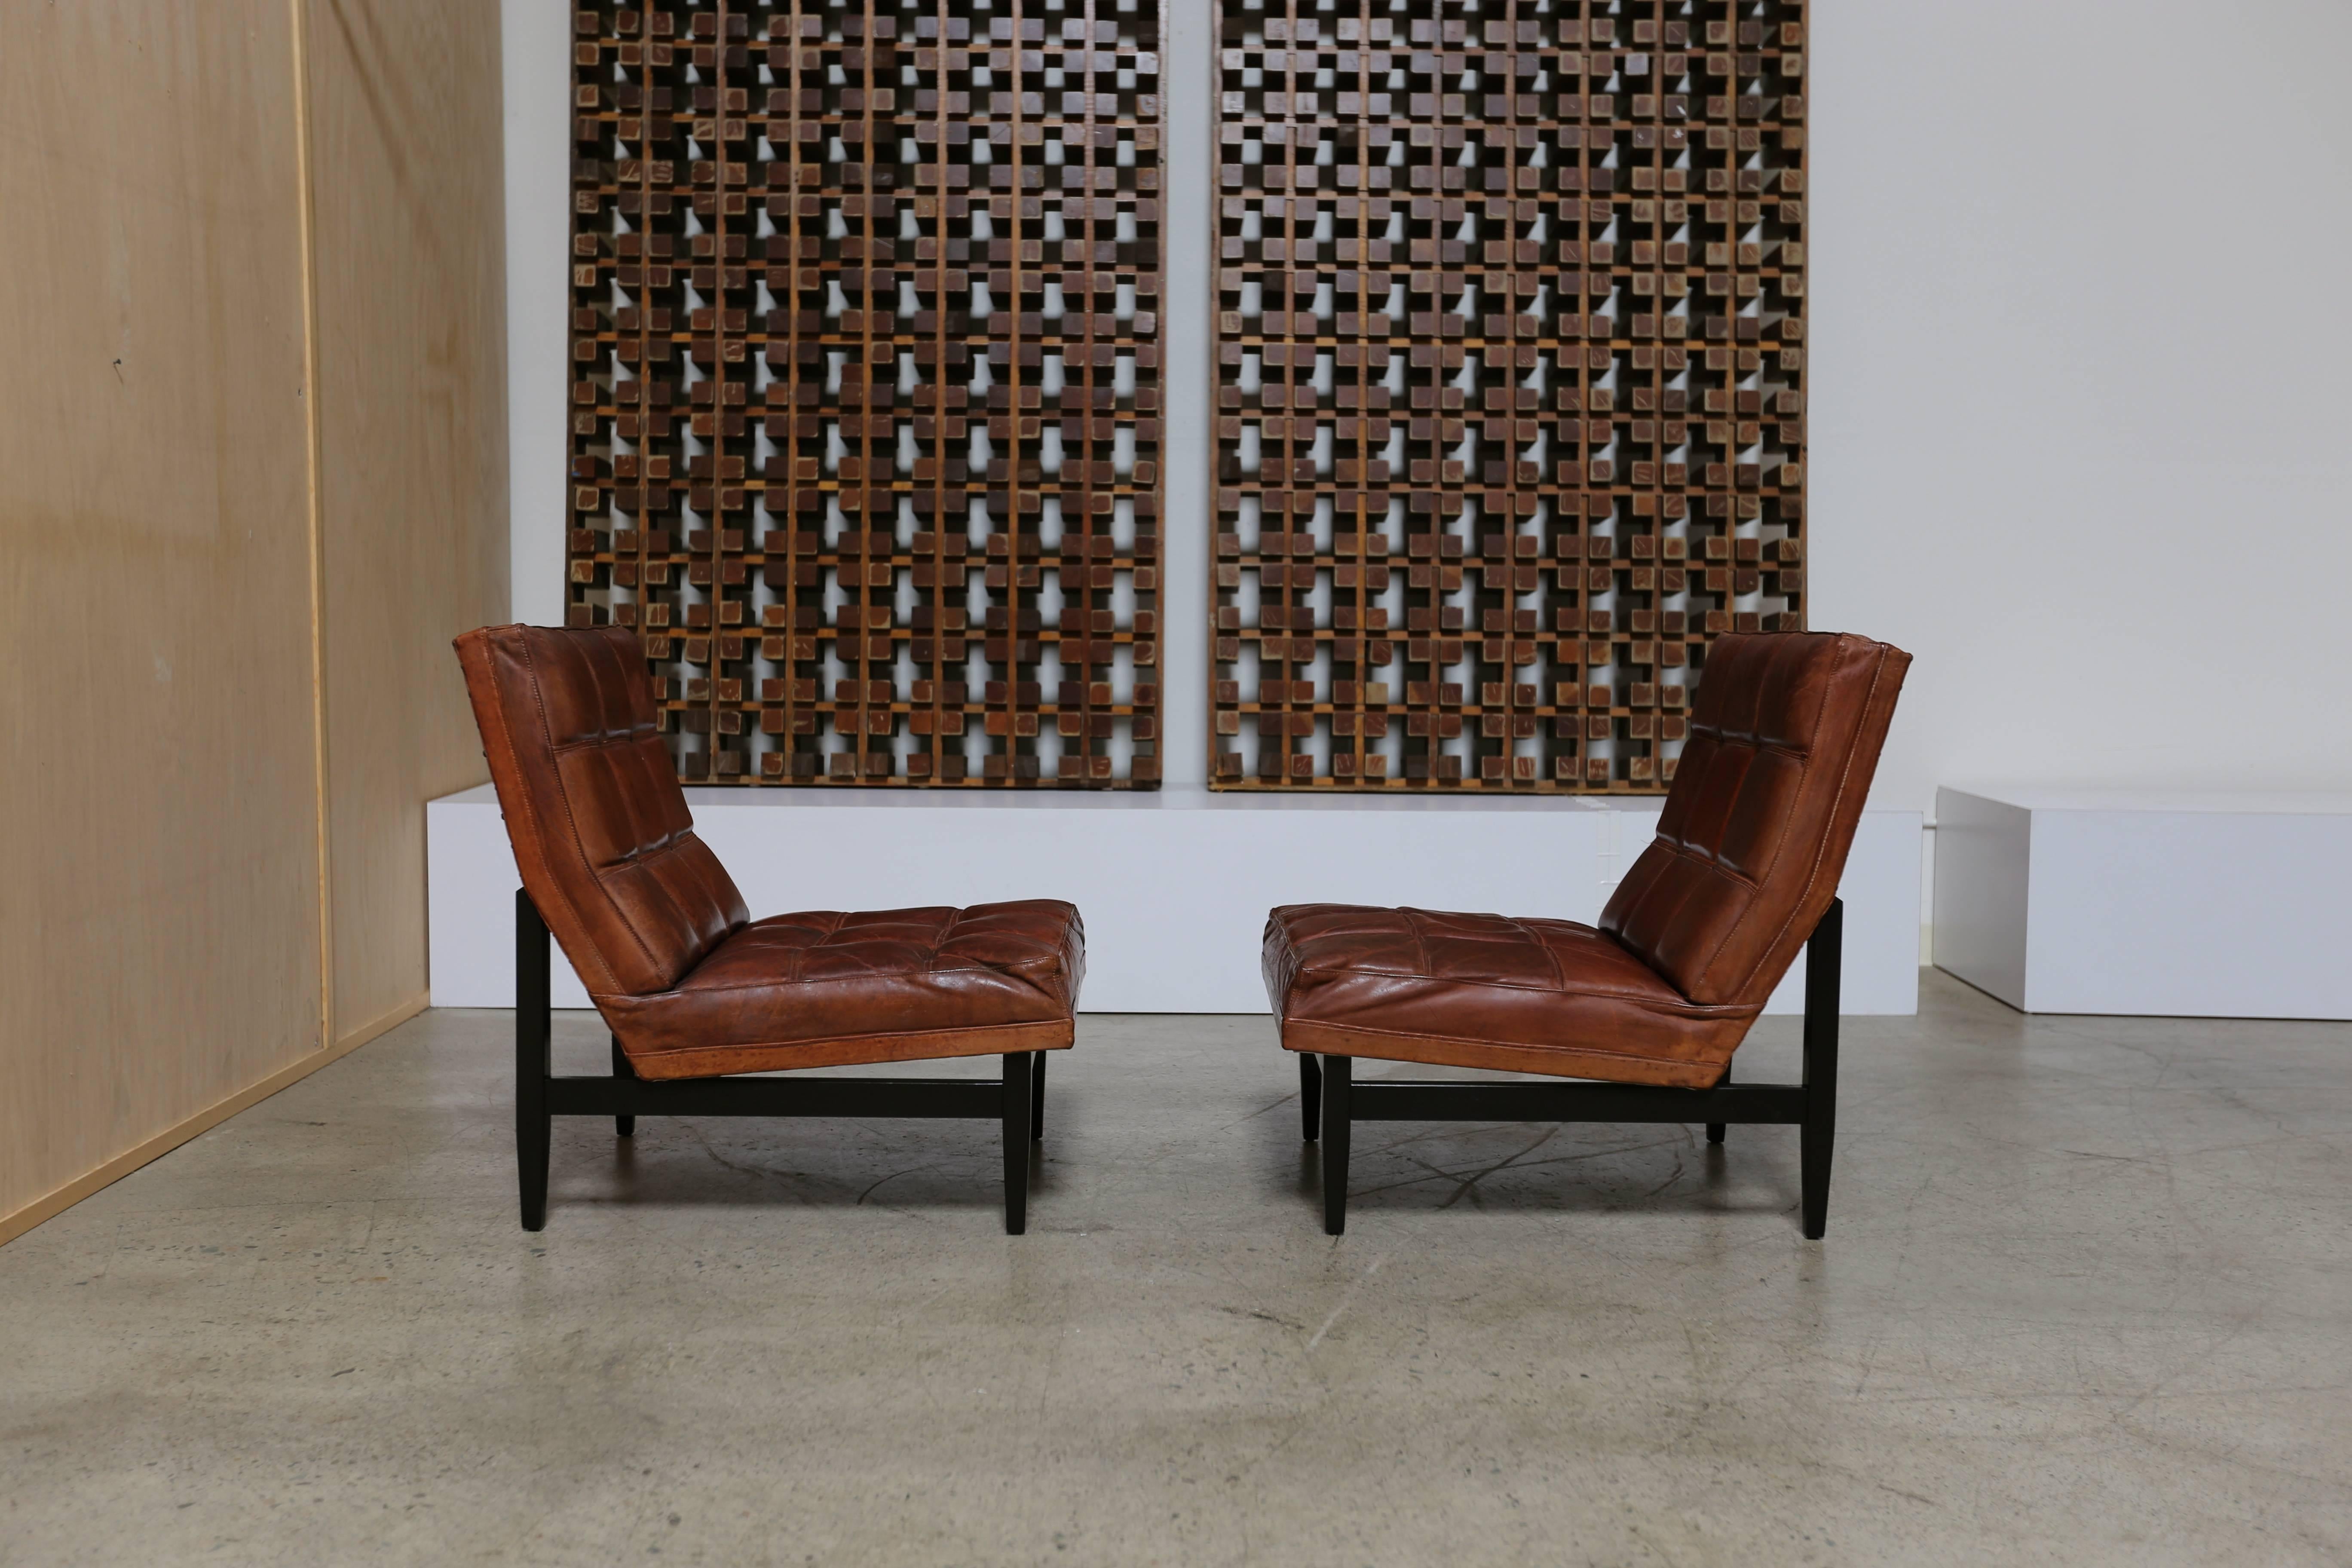 Pair of box stitched leather lounge chairs by Camacho Roldan & Artecto Colombia. Beautiful patina to the original leather. We have a matching sofa on another listing.